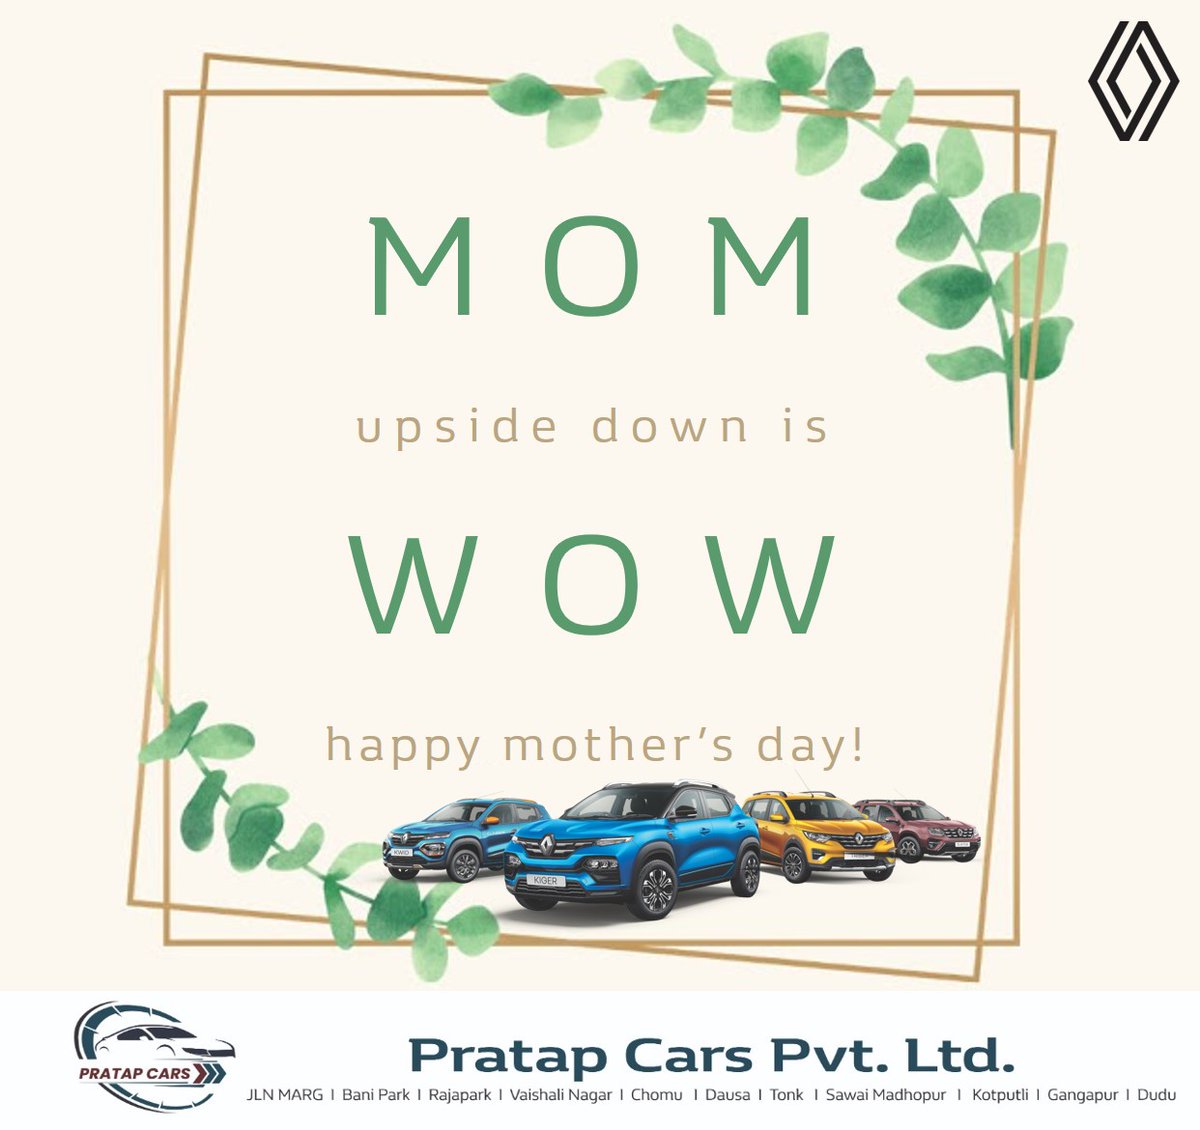 You make this world so full of love by the beautiful touch of your motherhood. Thanks, mom. Happy Mother’s Day

#prataprenault #renaultindia #mothersday #happymothersday #care #motherhood #jaipur #rajasthan #newrenault #bookrenault #giftyourmom